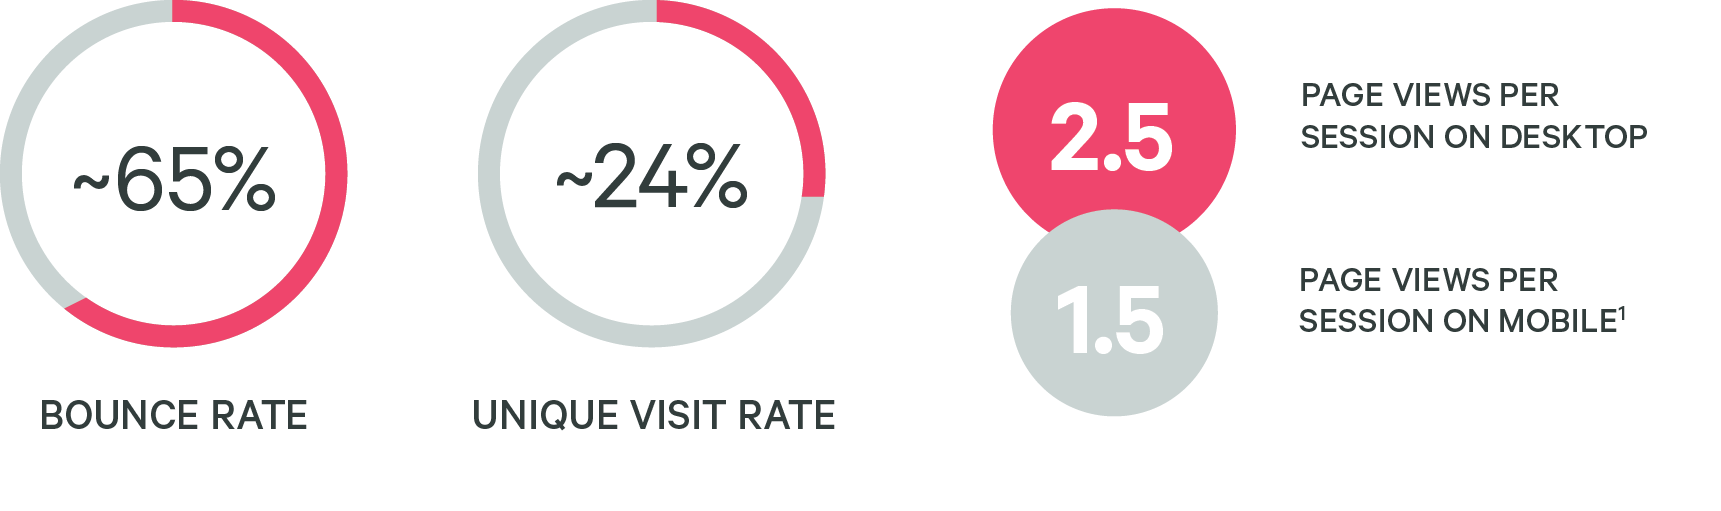 An infographic that states: ~65% bounce rate, ~24% unique visit rate, 2.5 page views per session on desktop, 1.5 page views per session on mobile